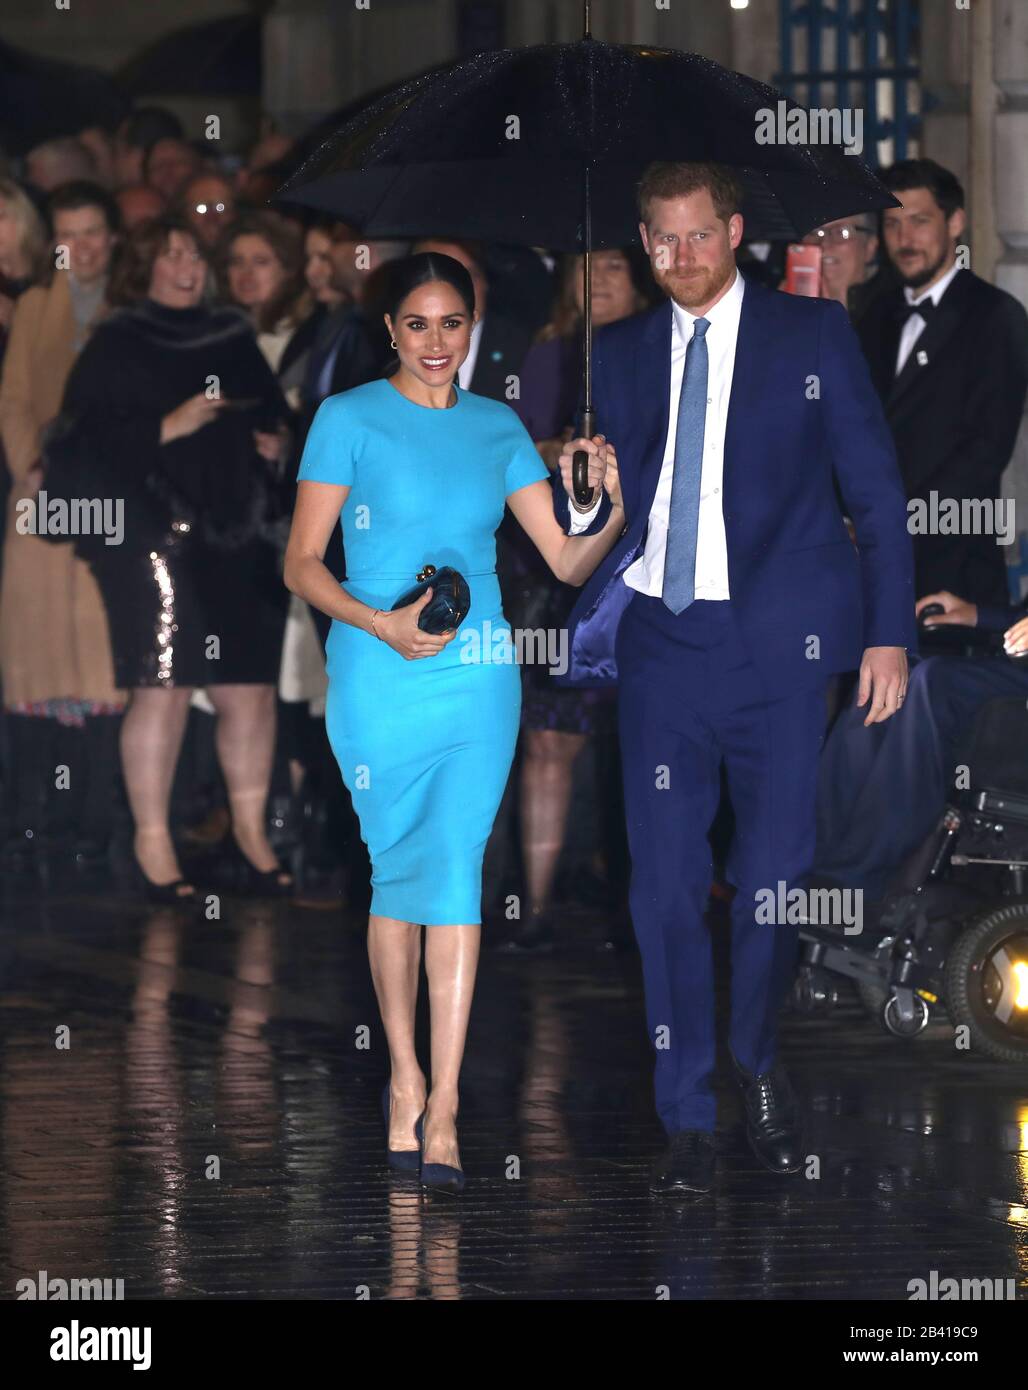 London, UK. 05th Mar, 2020. Prince Harry, Duke of Sussex, and Meghan Markle, Duchess of Sussex, attend the annual Endeavour Fund Awards. The awards celebrate achievements of wounded, injured and sick servicemen and women who have taken part in remarkable sporting and adventure challenges over the last year. Prince Harry, Duke of Sussex, and Meghan Markle, Duchess of Sussex, attend Endeavour Fund Awards, Mansion House, London, UK, on March 5, 2020. Credit: Paul Marriott/Alamy Live News Stock Photo